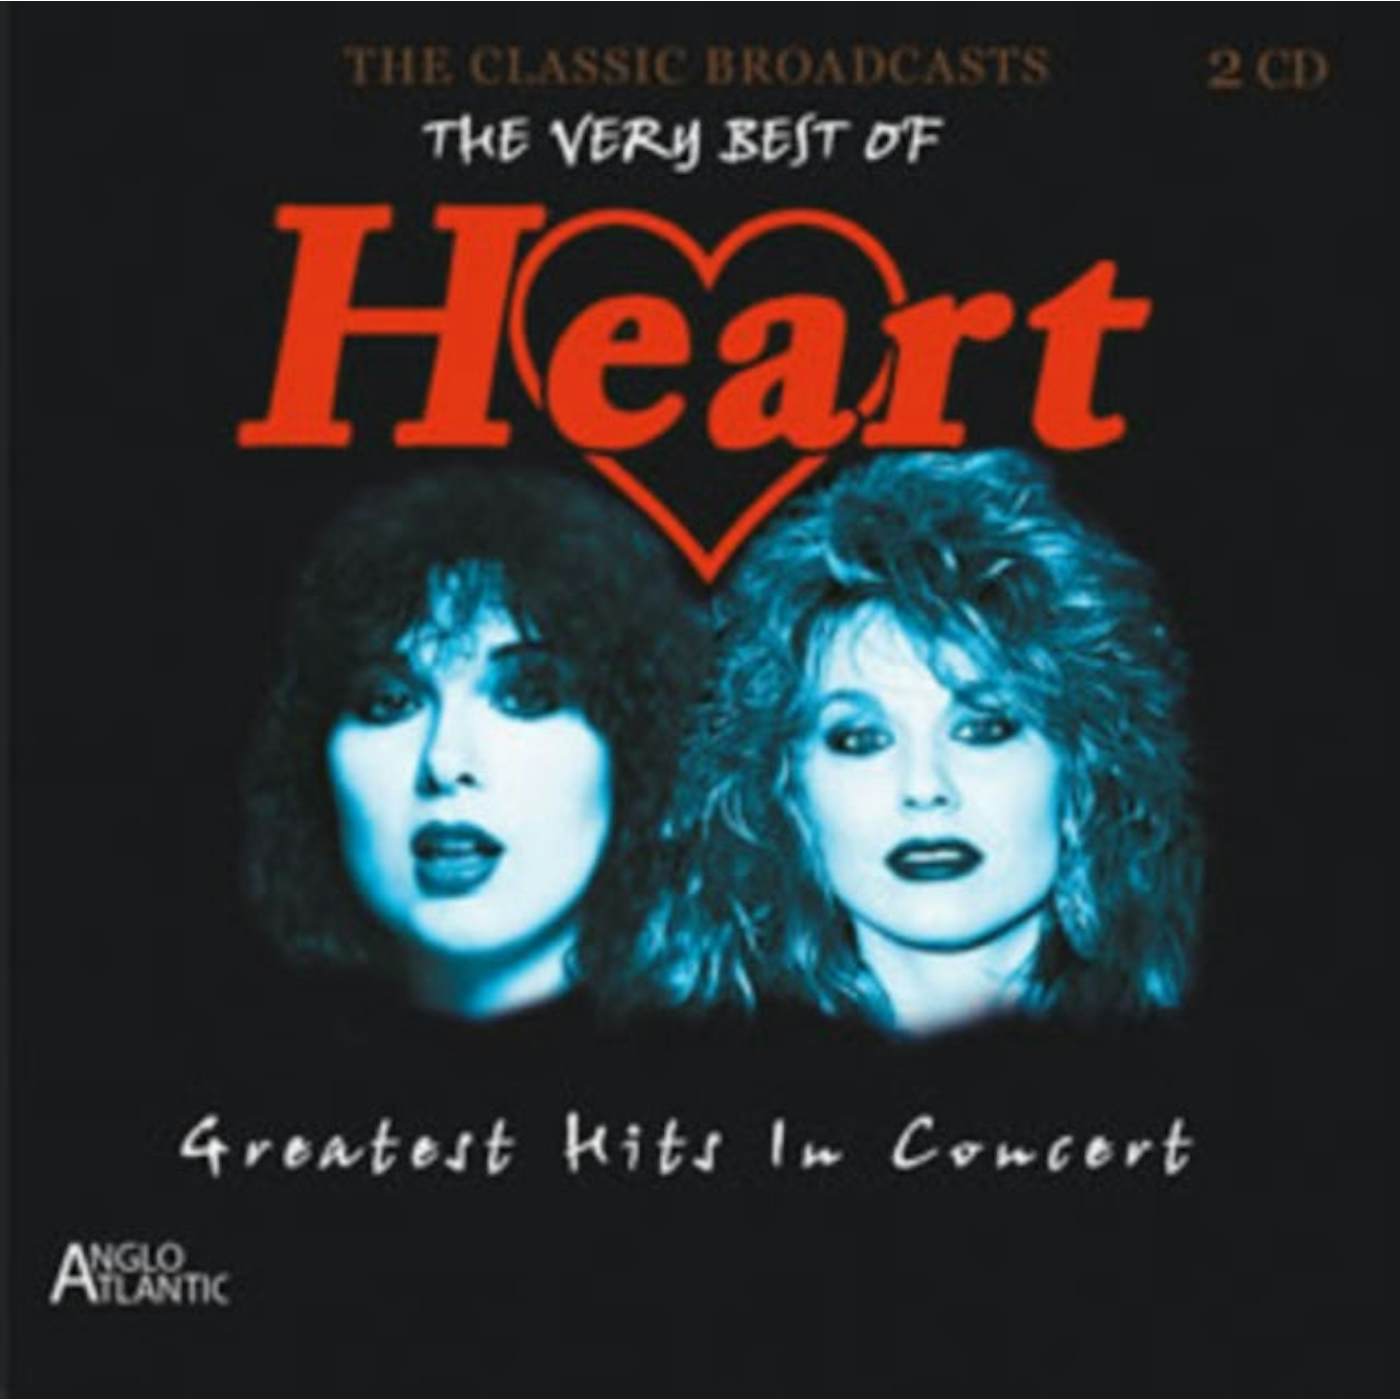 Heart CD - Greatest Hits In Concert - The Halcyon Years 19 78-89